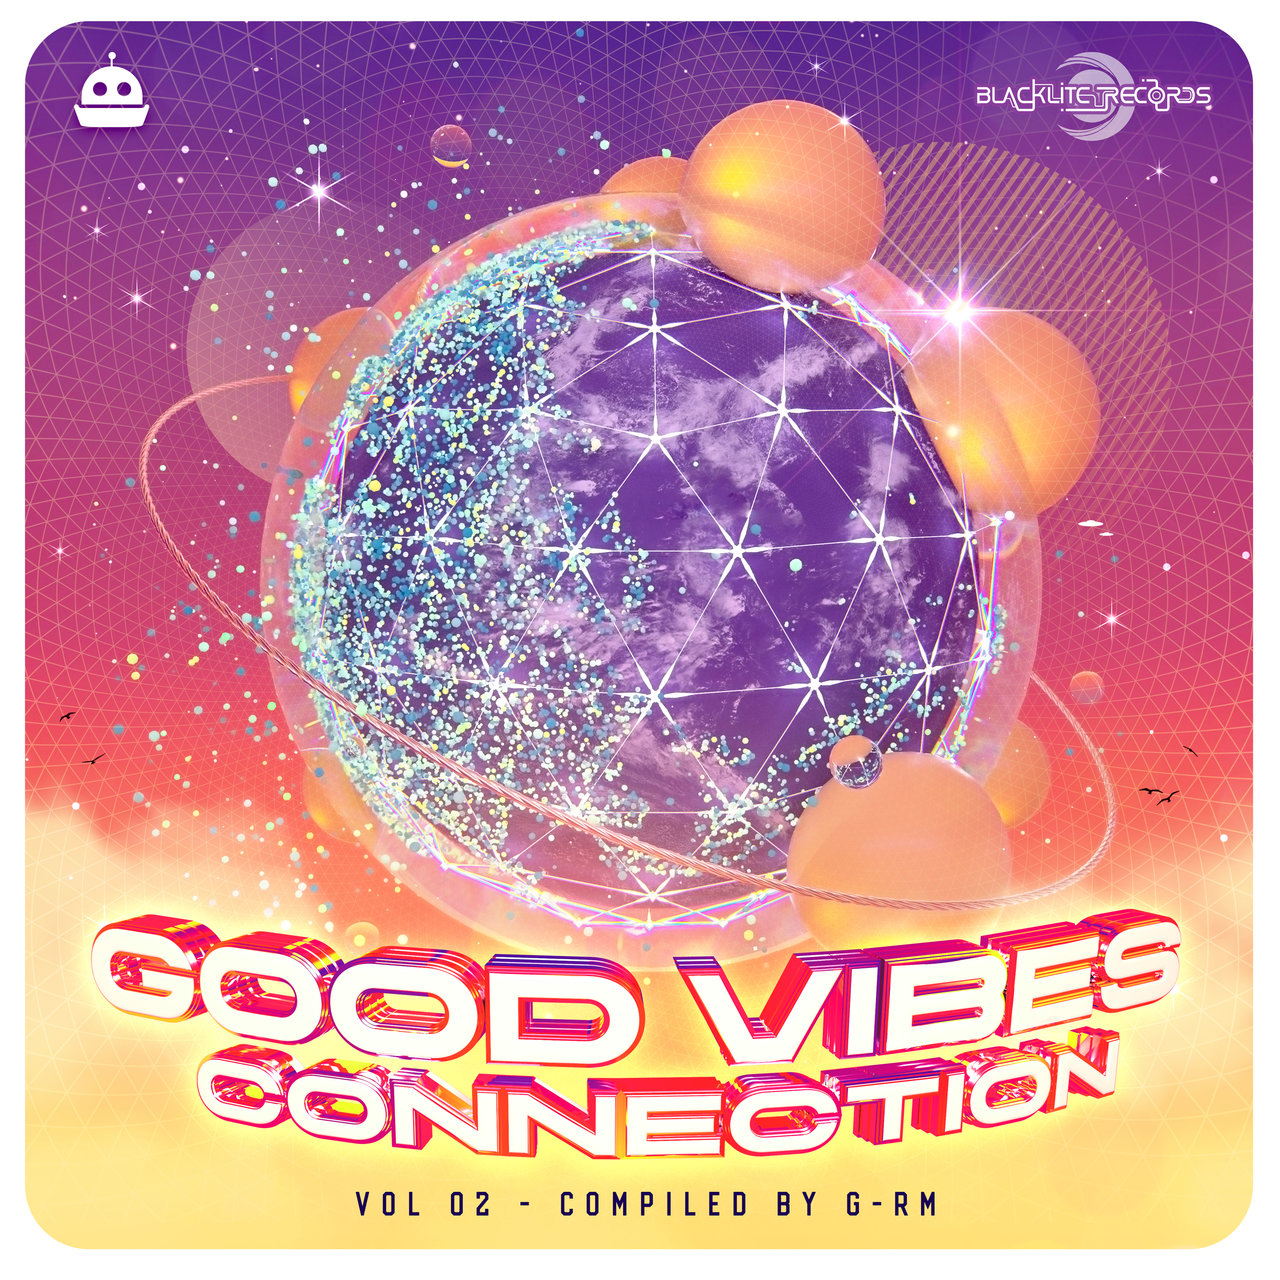 Good Vibes Connection, Vol 02 (Compiled by G-RM)